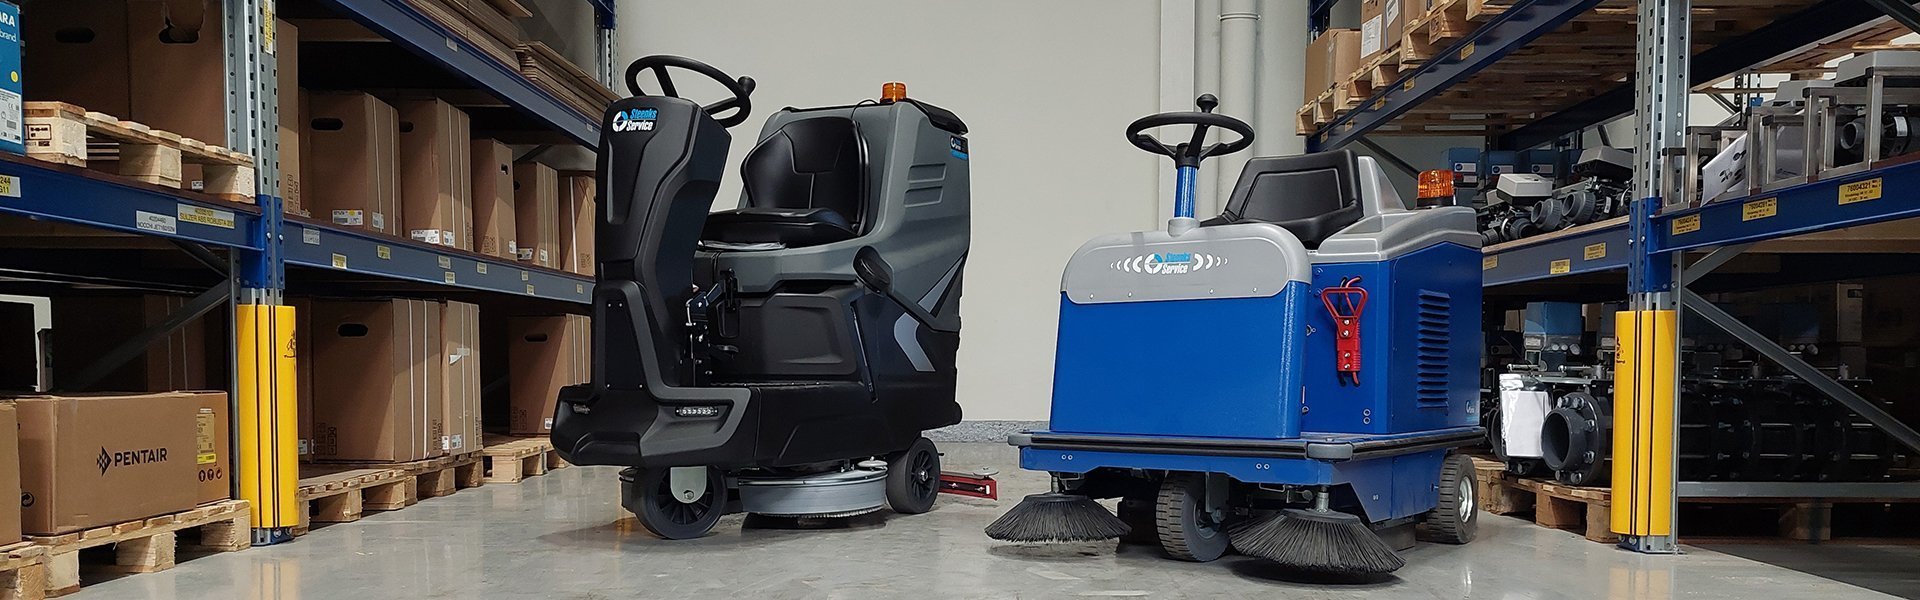 Stefix takes floor cleaning to a new level | Steenks Service